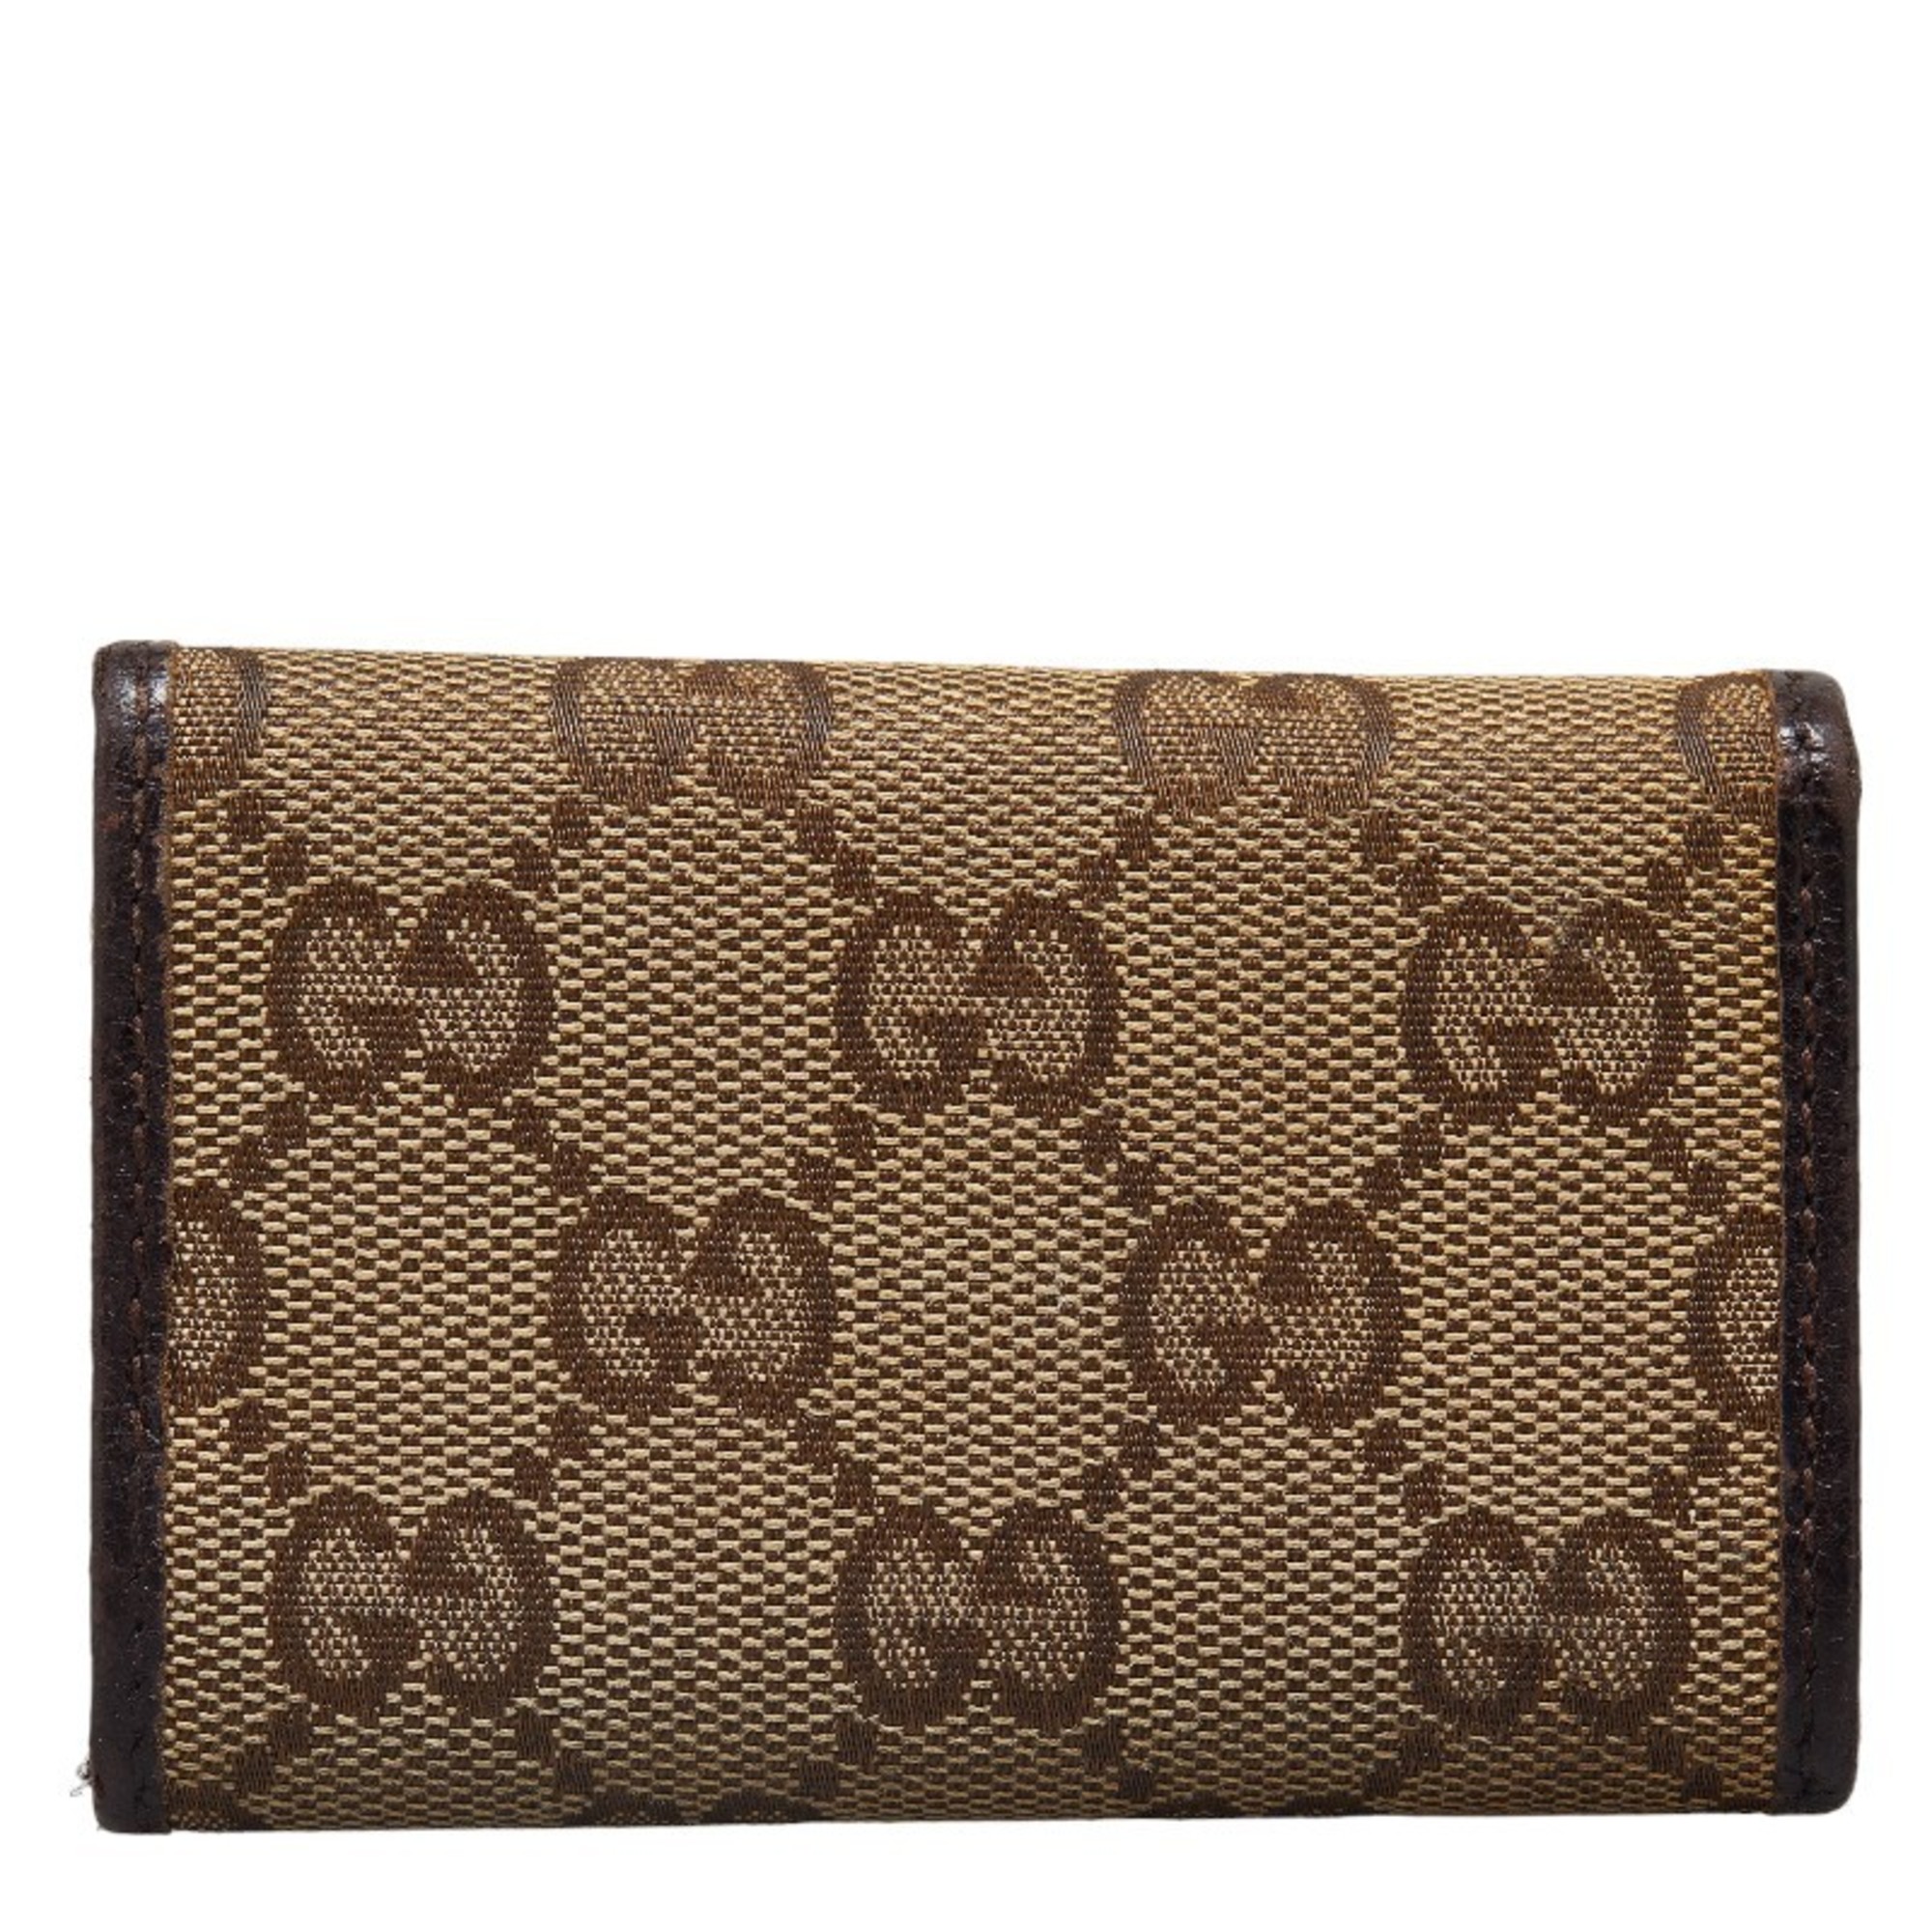 Gucci GG Canvas 6-ring Key Case 127048 Beige Brown Leather Women's GUCCI